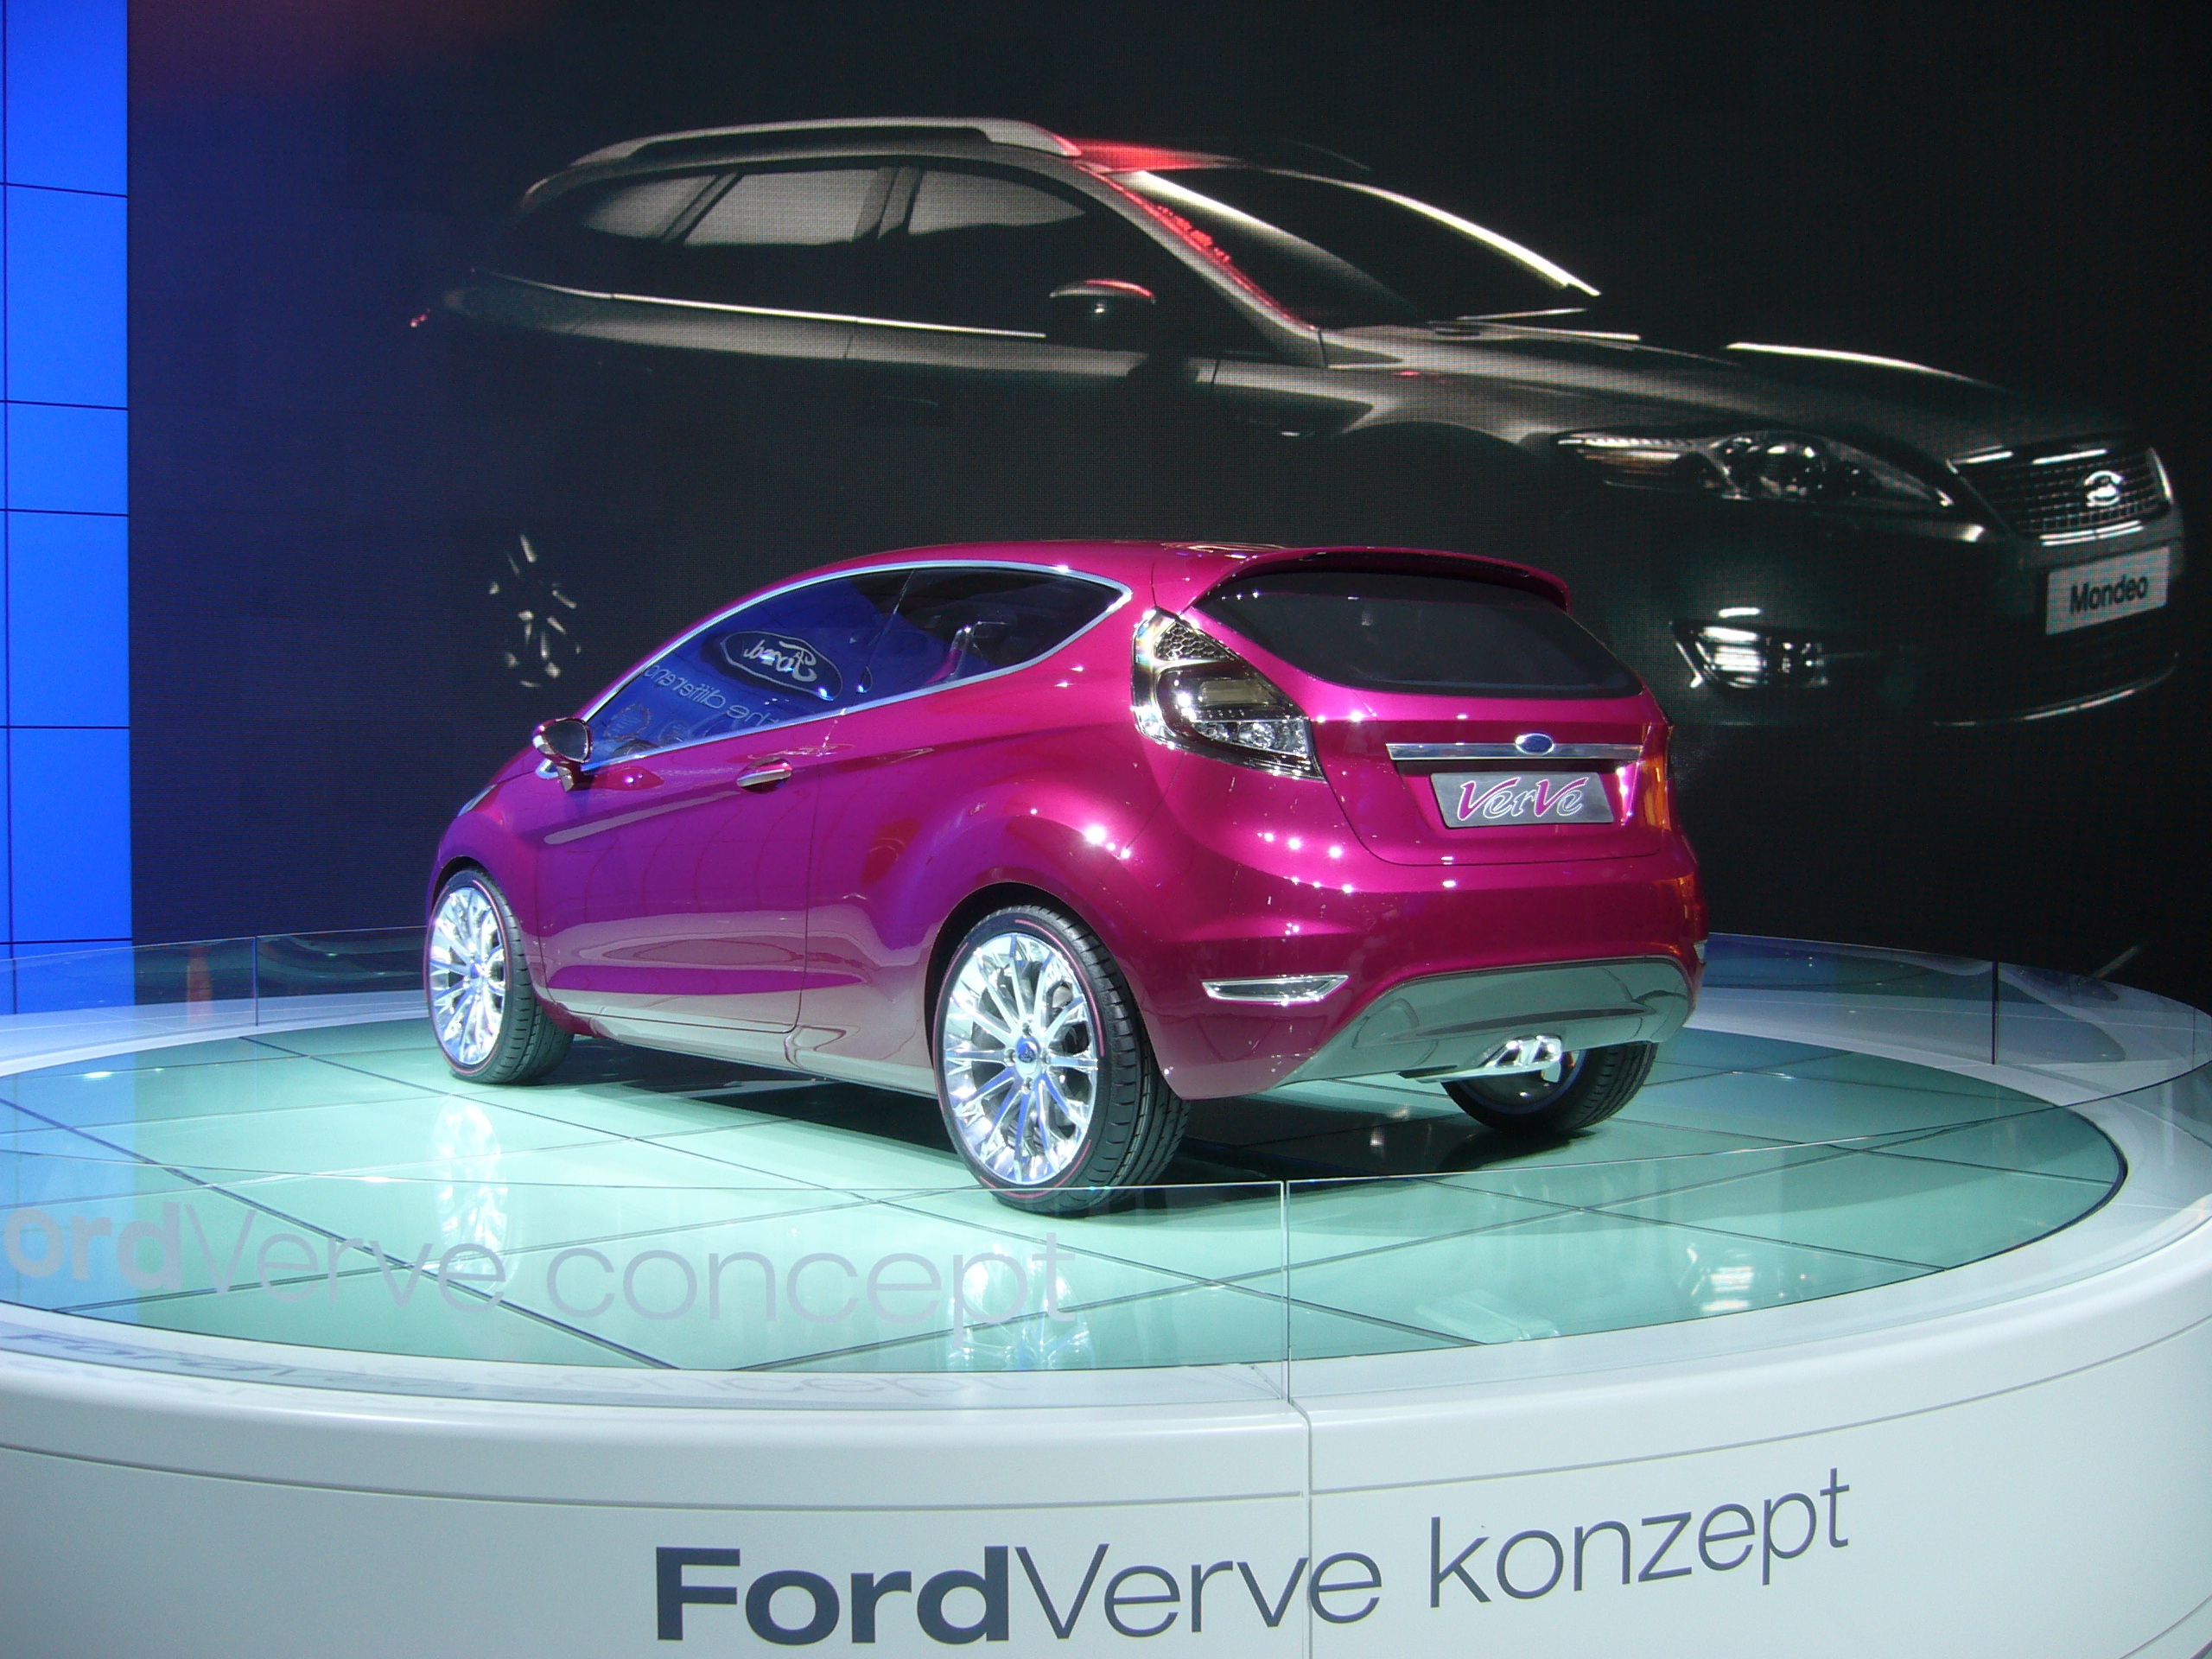 Ford Verve